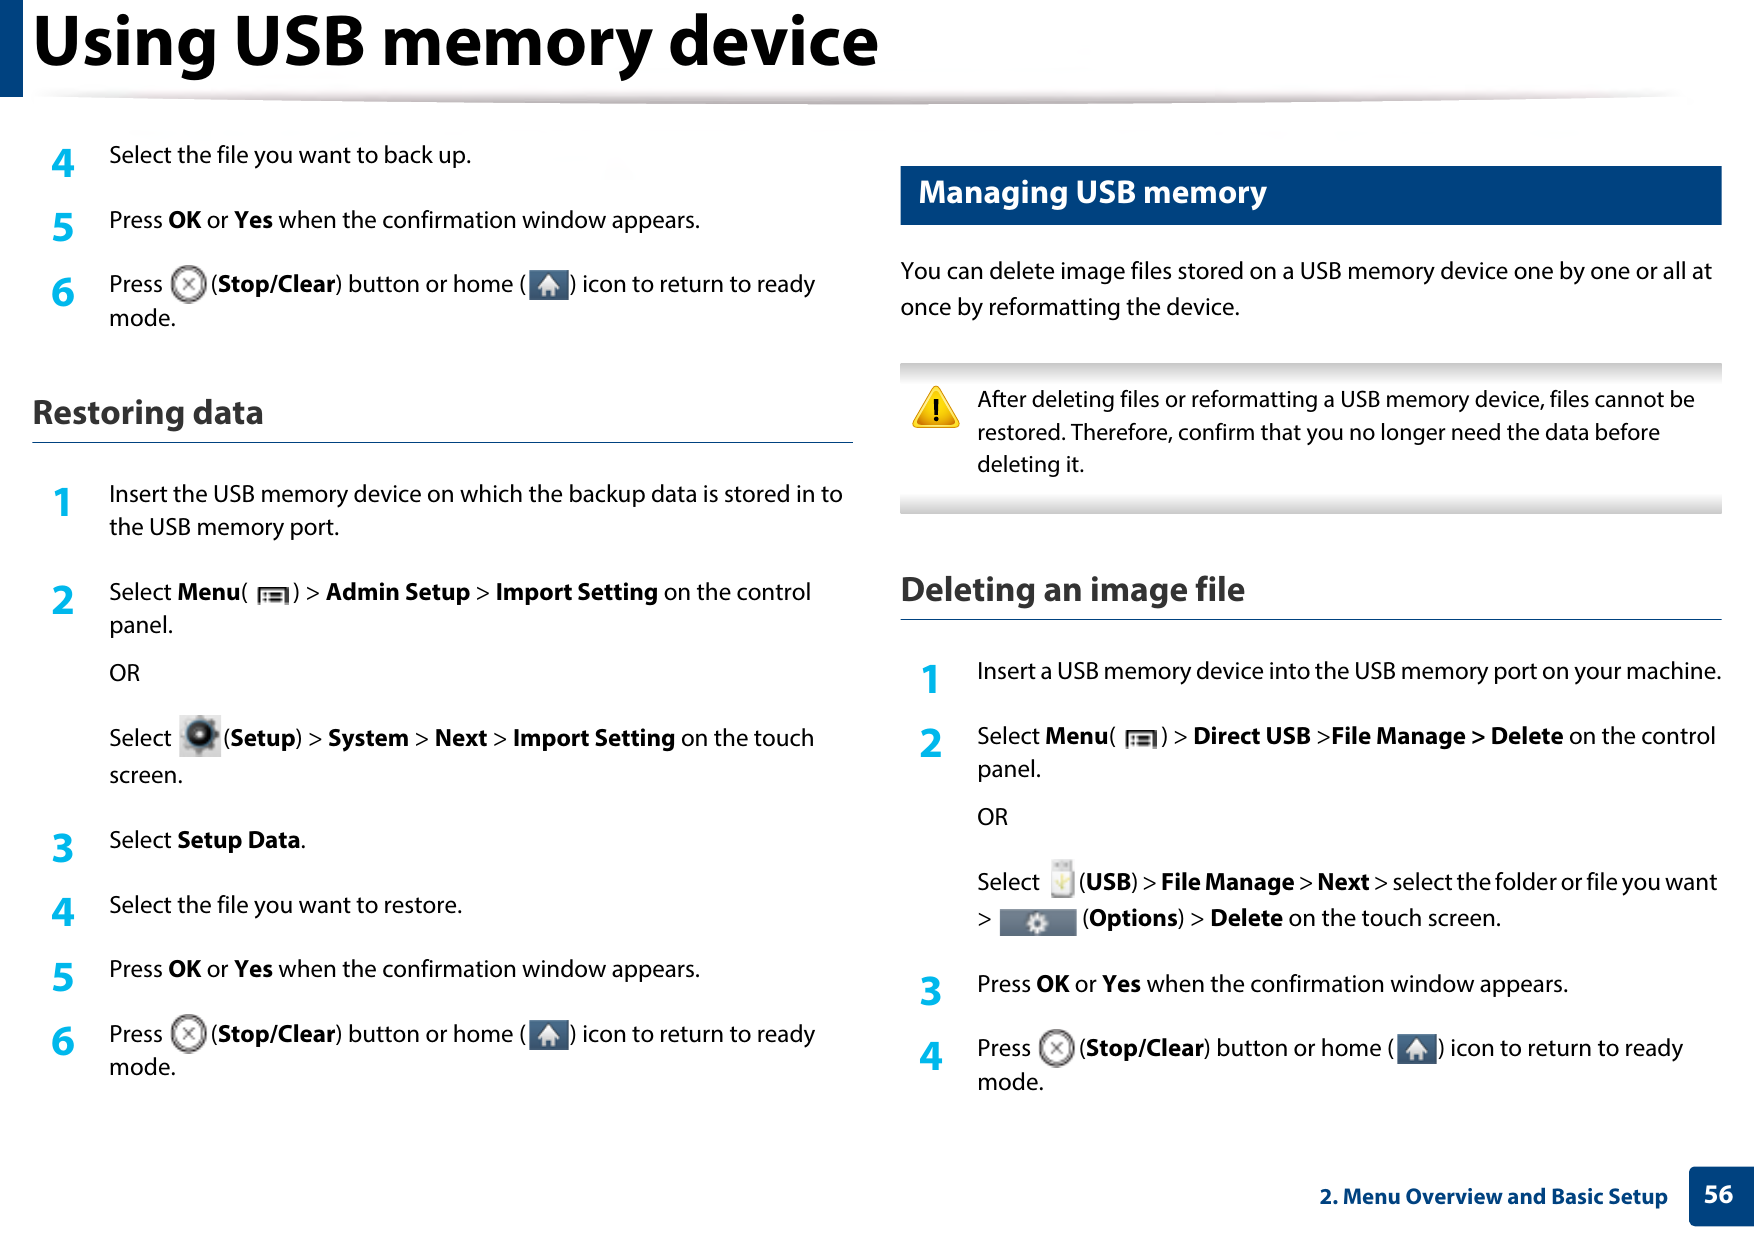 Using USB memory device562. Menu Overview and Basic Setup4  Select the file you want to back up.5  Press OK or Yes when the confirmation window appears.6  Press (Stop/Clear) button or home ( ) icon to return to ready mode.Restoring data1Insert the USB memory device on which the backup data is stored in to the USB memory port.2  Select Menu() &gt; Admin Setup &gt; Import Setting on the control panel.ORSelect (Setup) &gt; System &gt; Next &gt; Import Setting on the touch screen.3  Select Setup Data. 4  Select the file you want to restore.5  Press OK or Yes when the confirmation window appears.6  Press (Stop/Clear) button or home ( ) icon to return to ready mode.17 Managing USB memoryYou can delete image files stored on a USB memory device one by one or all at once by reformatting the device. After deleting files or reformatting a USB memory device, files cannot be restored. Therefore, confirm that you no longer need the data before deleting it. Deleting an image file1Insert a USB memory device into the USB memory port on your machine.2  Select Menu() &gt; Direct USB &gt;File Manage &gt; Delete on the control panel.ORSelect (USB) &gt; File Manage &gt; Next &gt; select the folder or file you want &gt;  (Options) &gt; Delete on the touch screen.3  Press OK or Yes when the confirmation window appears.4  Press (Stop/Clear) button or home ( ) icon to return to ready mode.